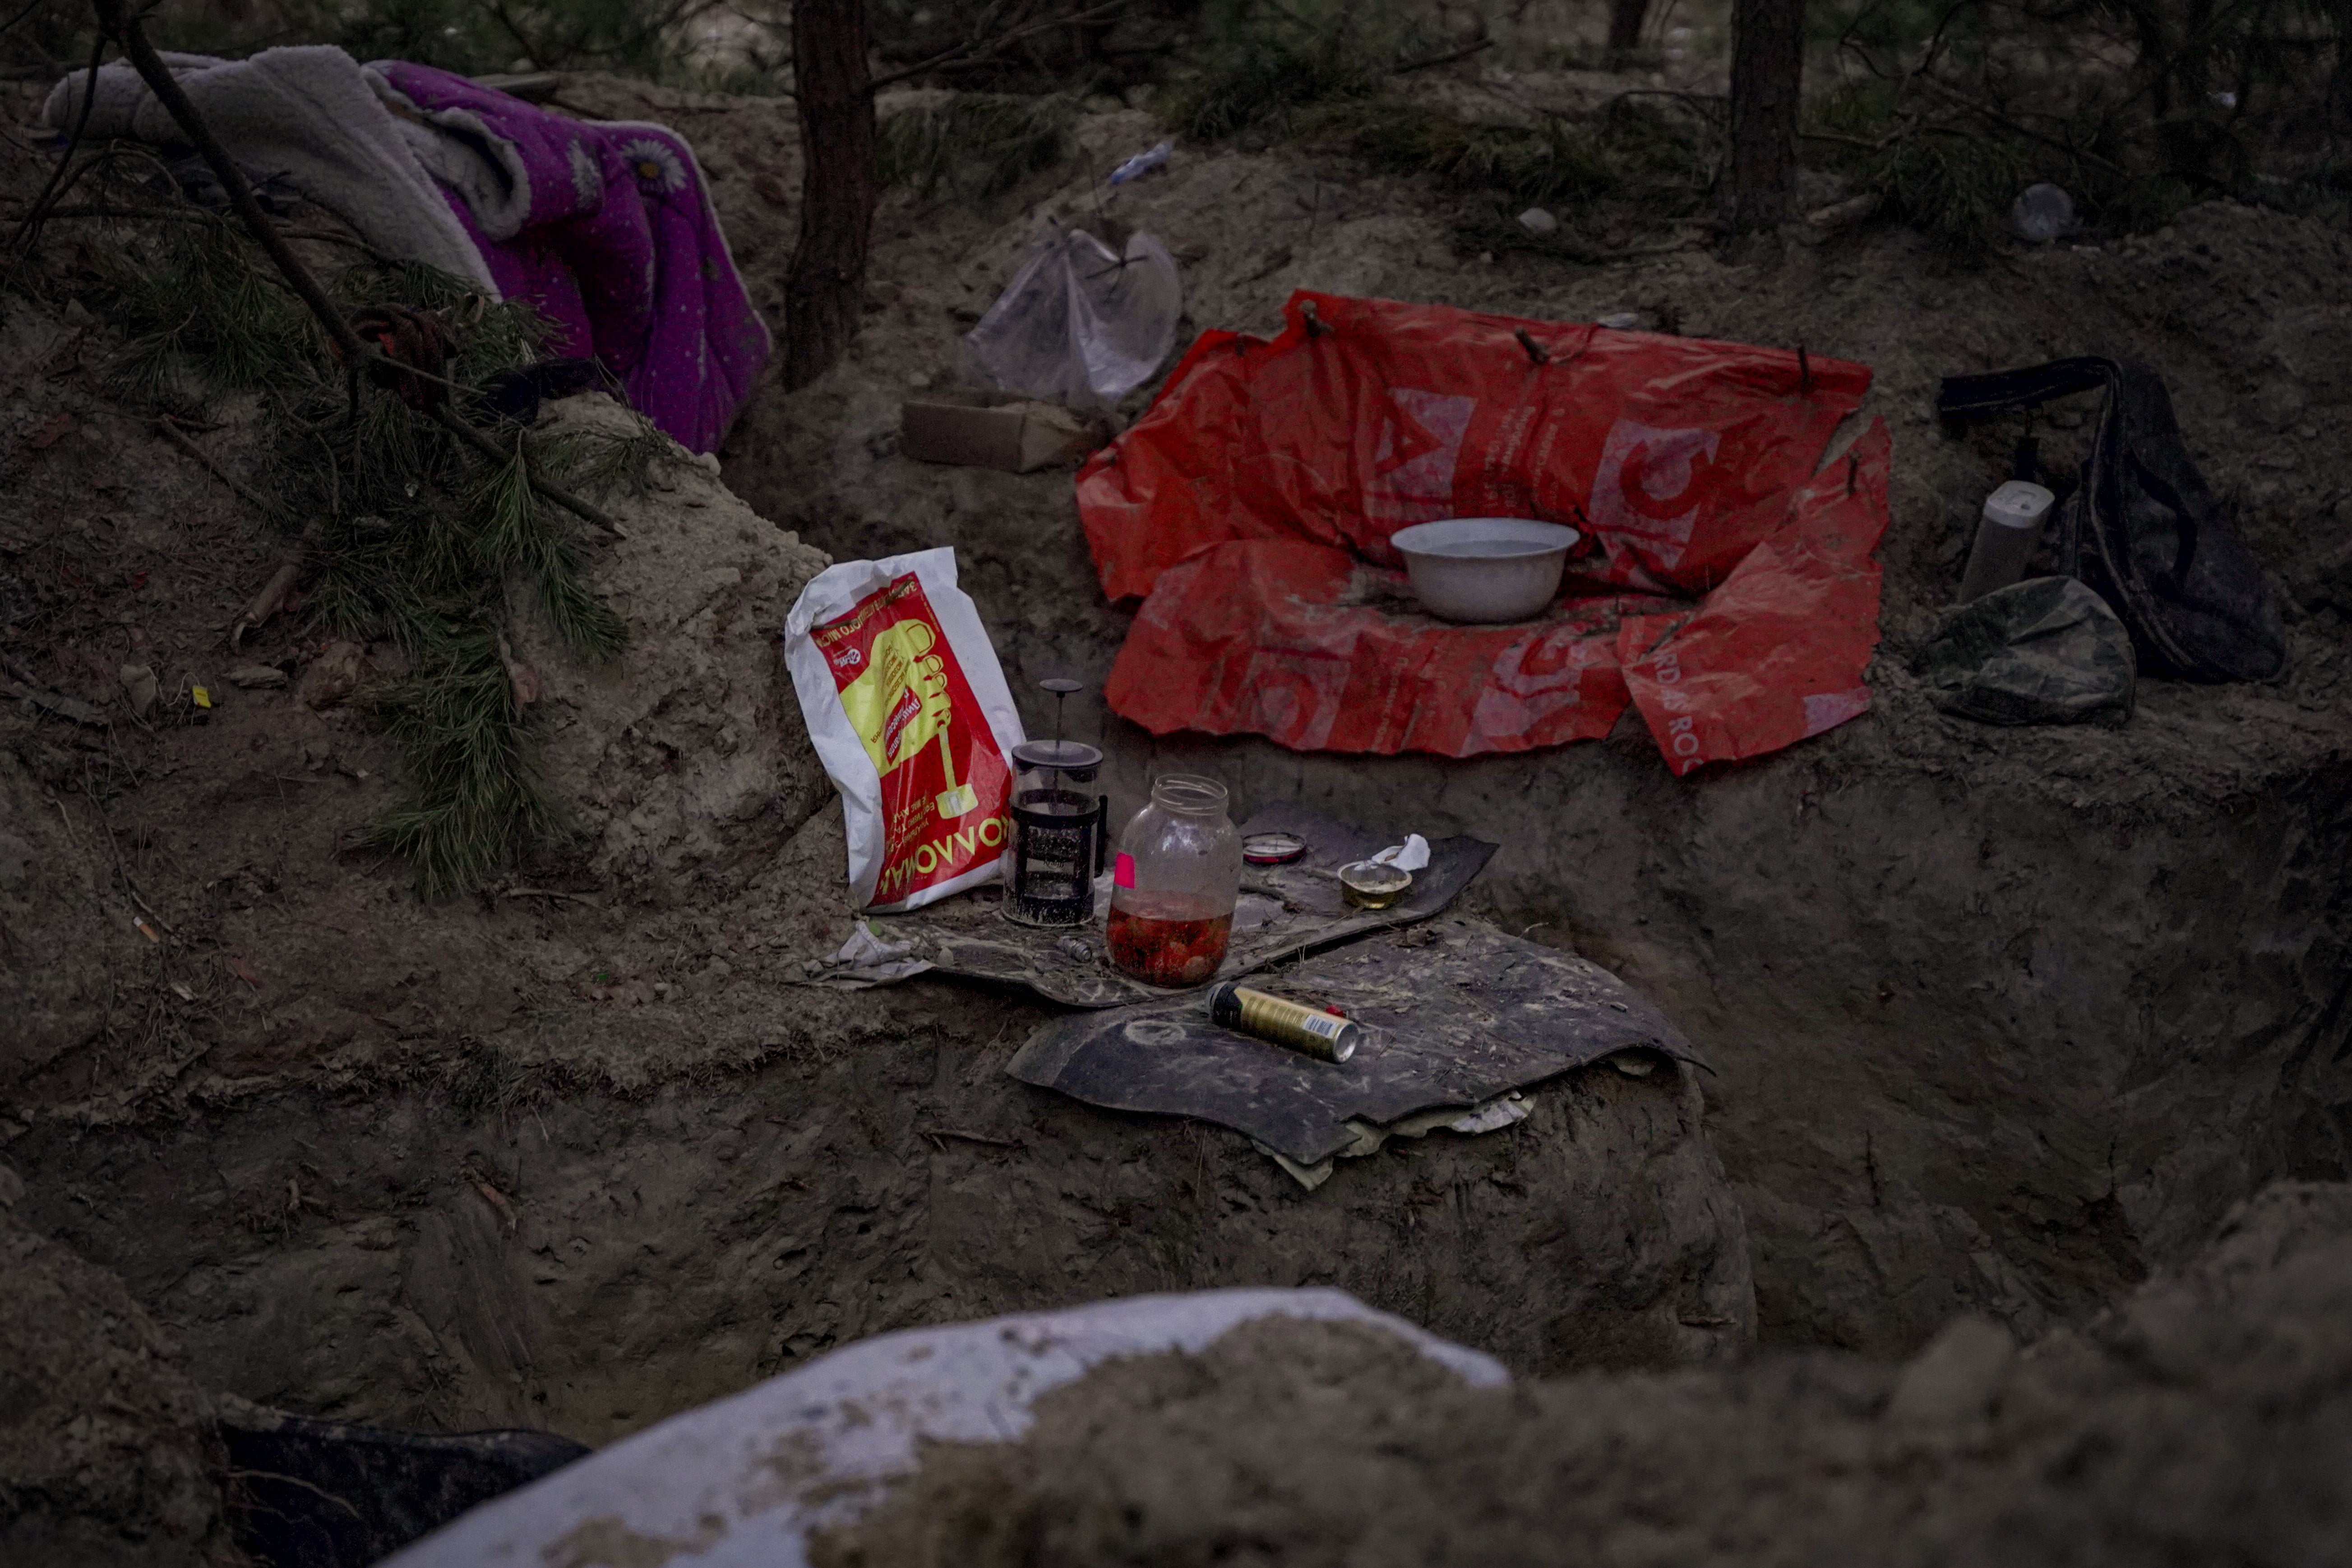 Russian soldiers left behind their cafetiere, among the debris of their camp near Makariv